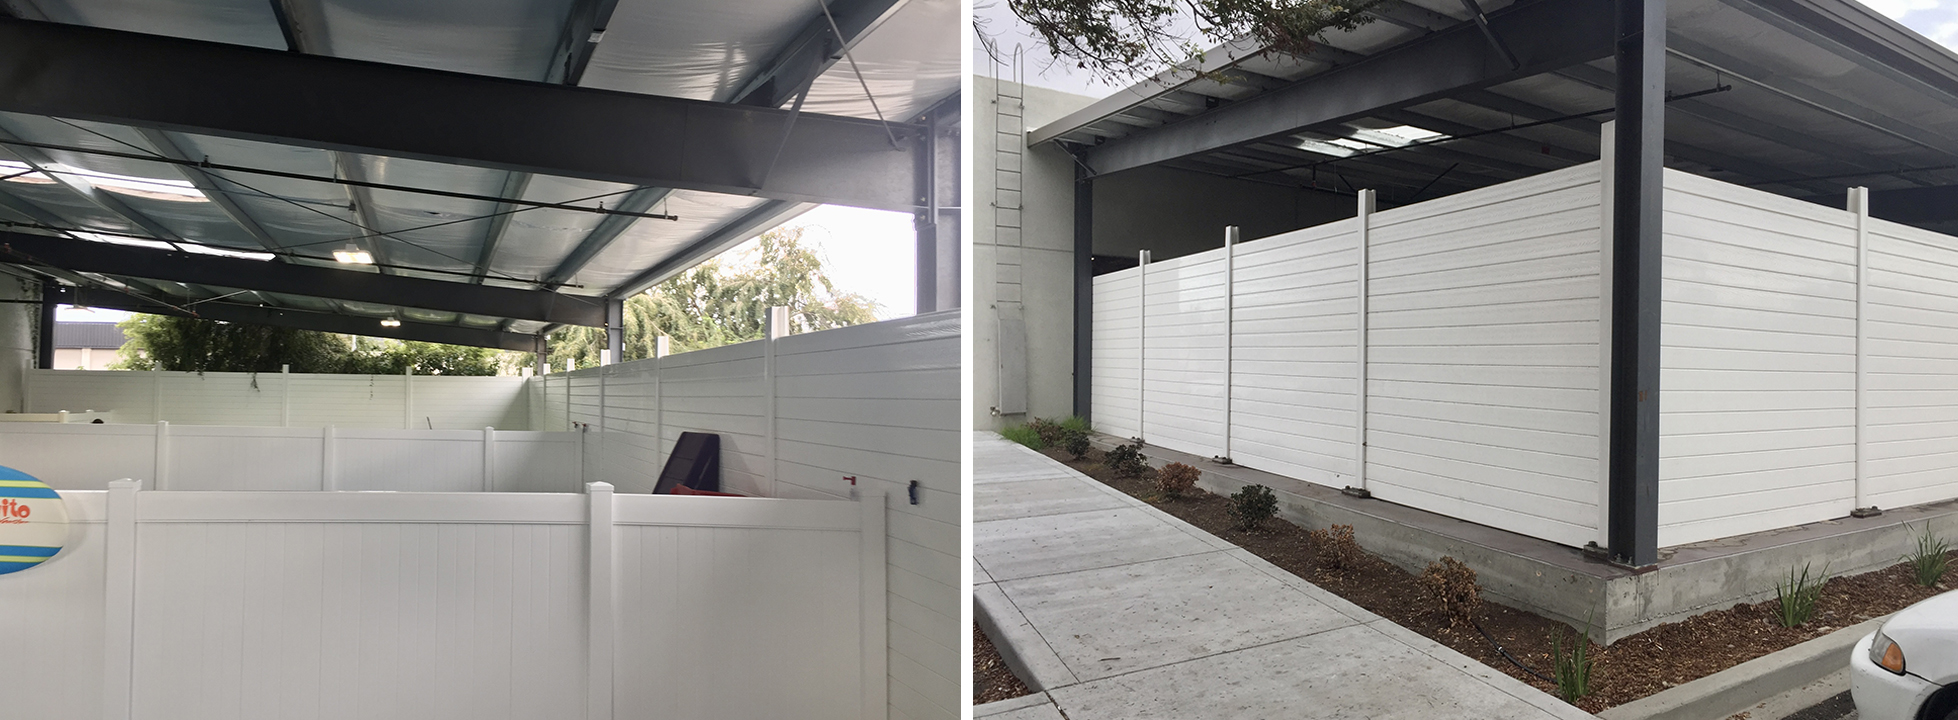 Interior and exterior views of sound wall at dog daycare